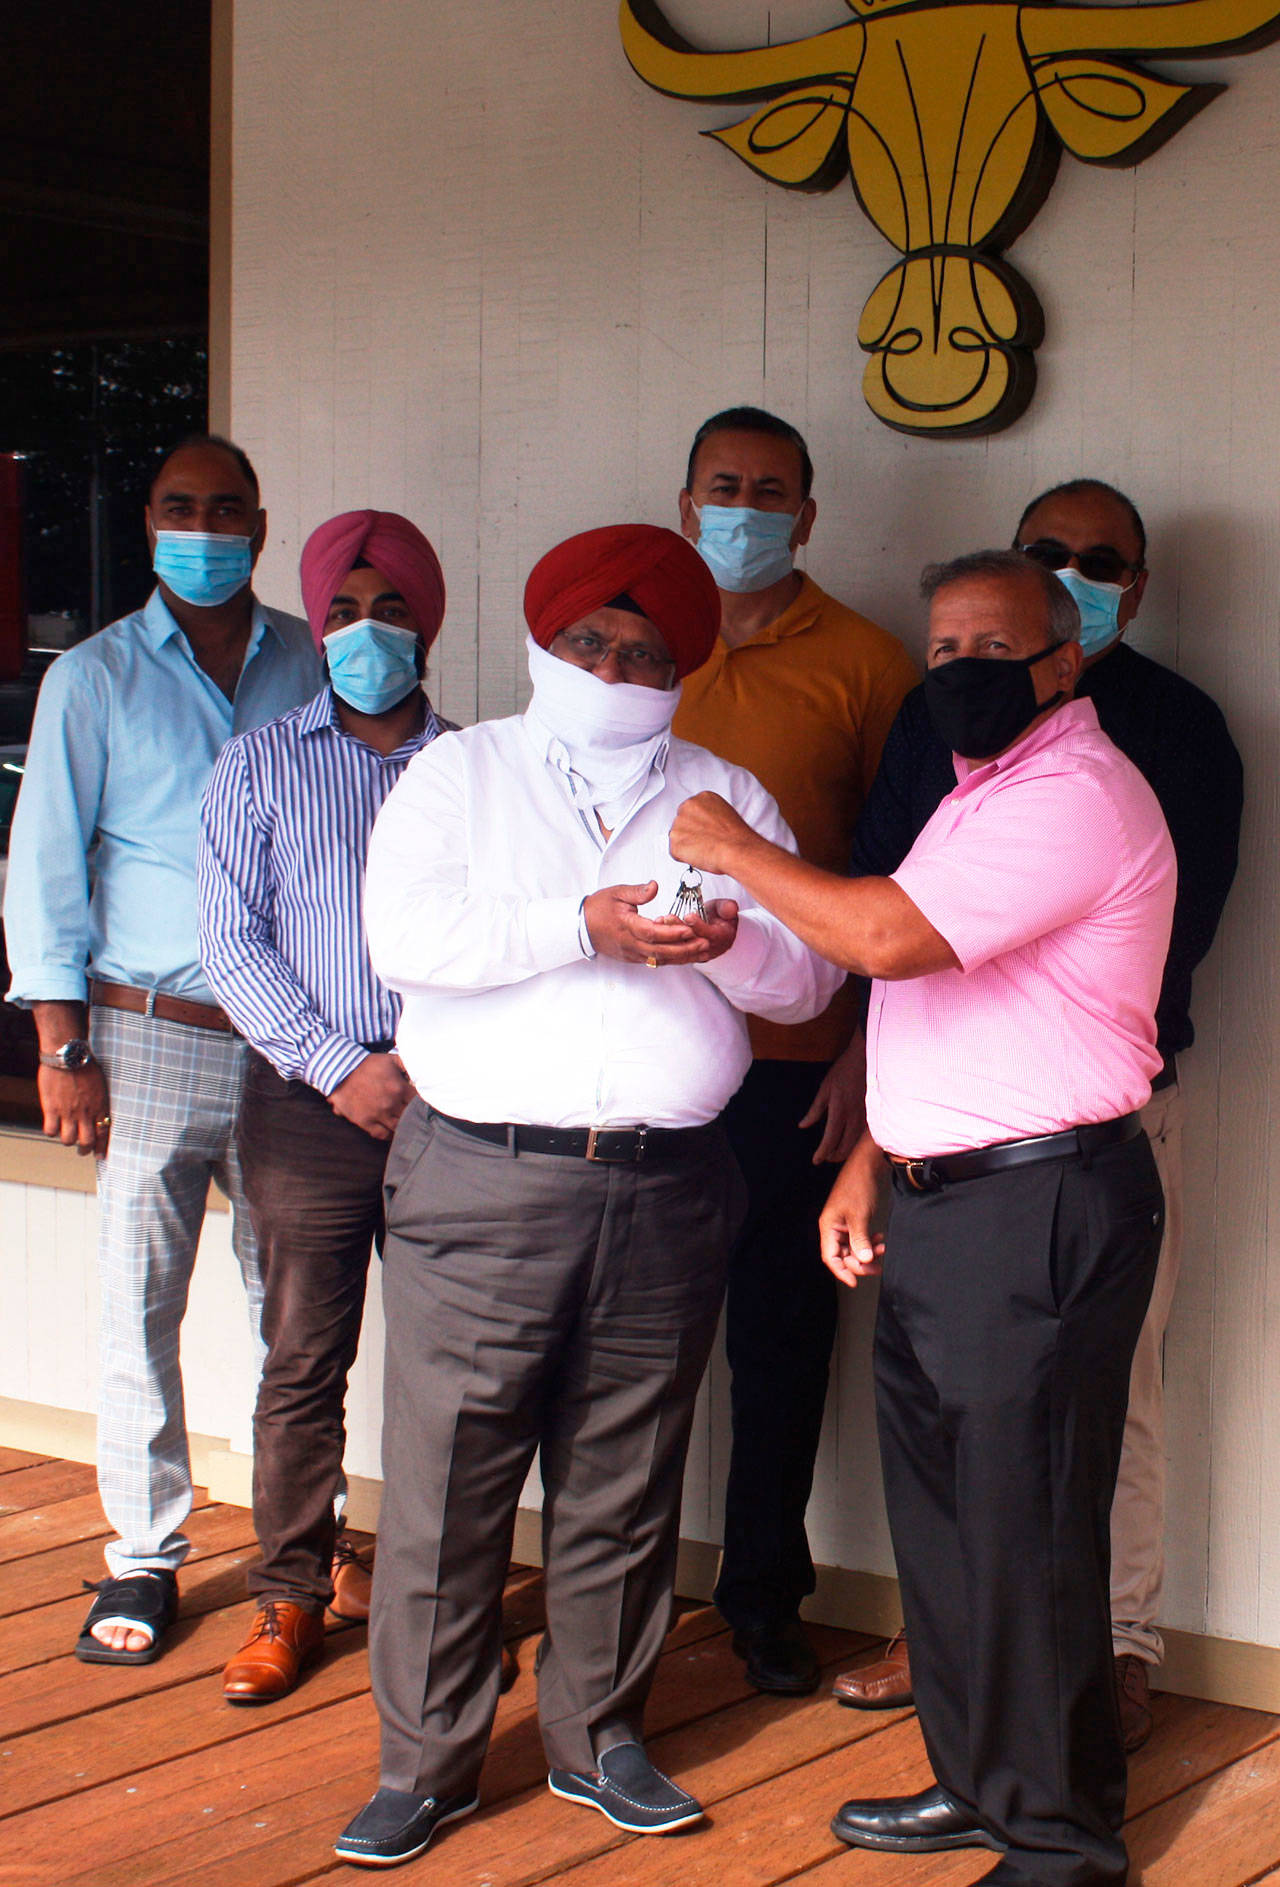 Jim Berrios, front right, hands over the keys to the Golden Steer Steak ‘n Rib House to the five new owners. From left to right, Sanil Sharma, Lokpal Singh, Mohinder Singh, Jagjit Singh Gill and Rajwant Singh. STEVE HUNTER, Kent Reporter